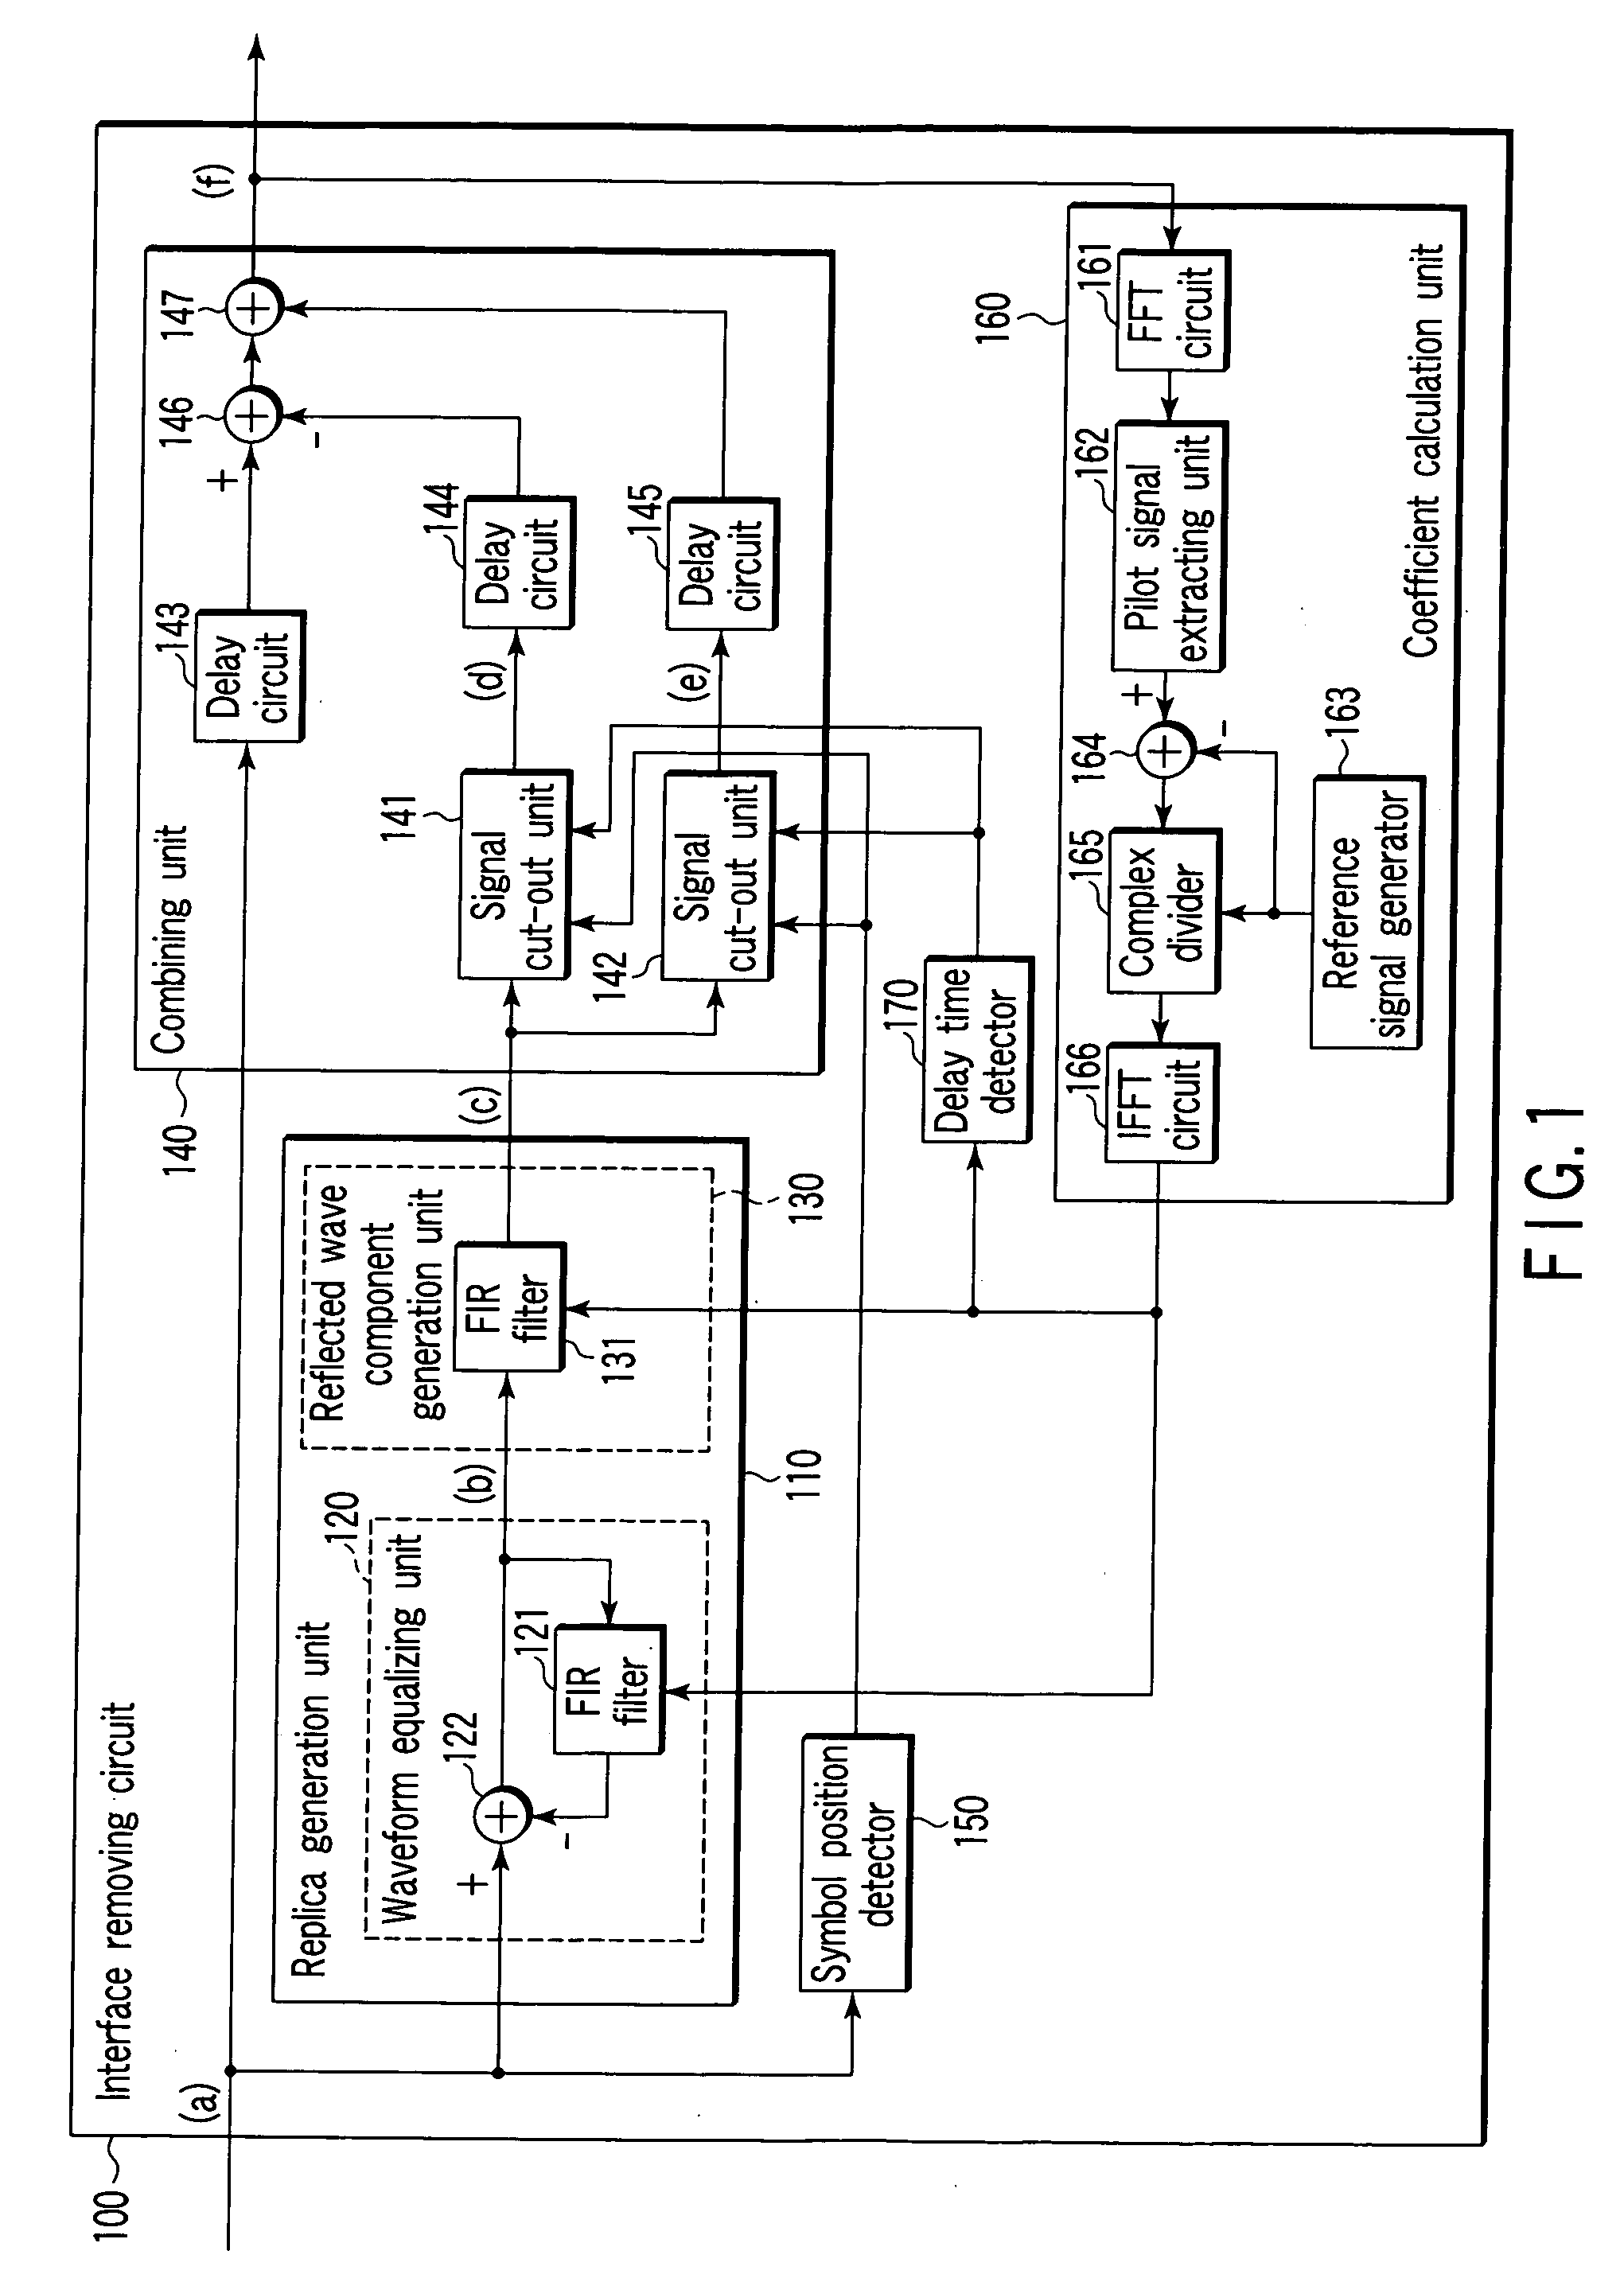 Receiver for digital modulated signal and receiving method for the same